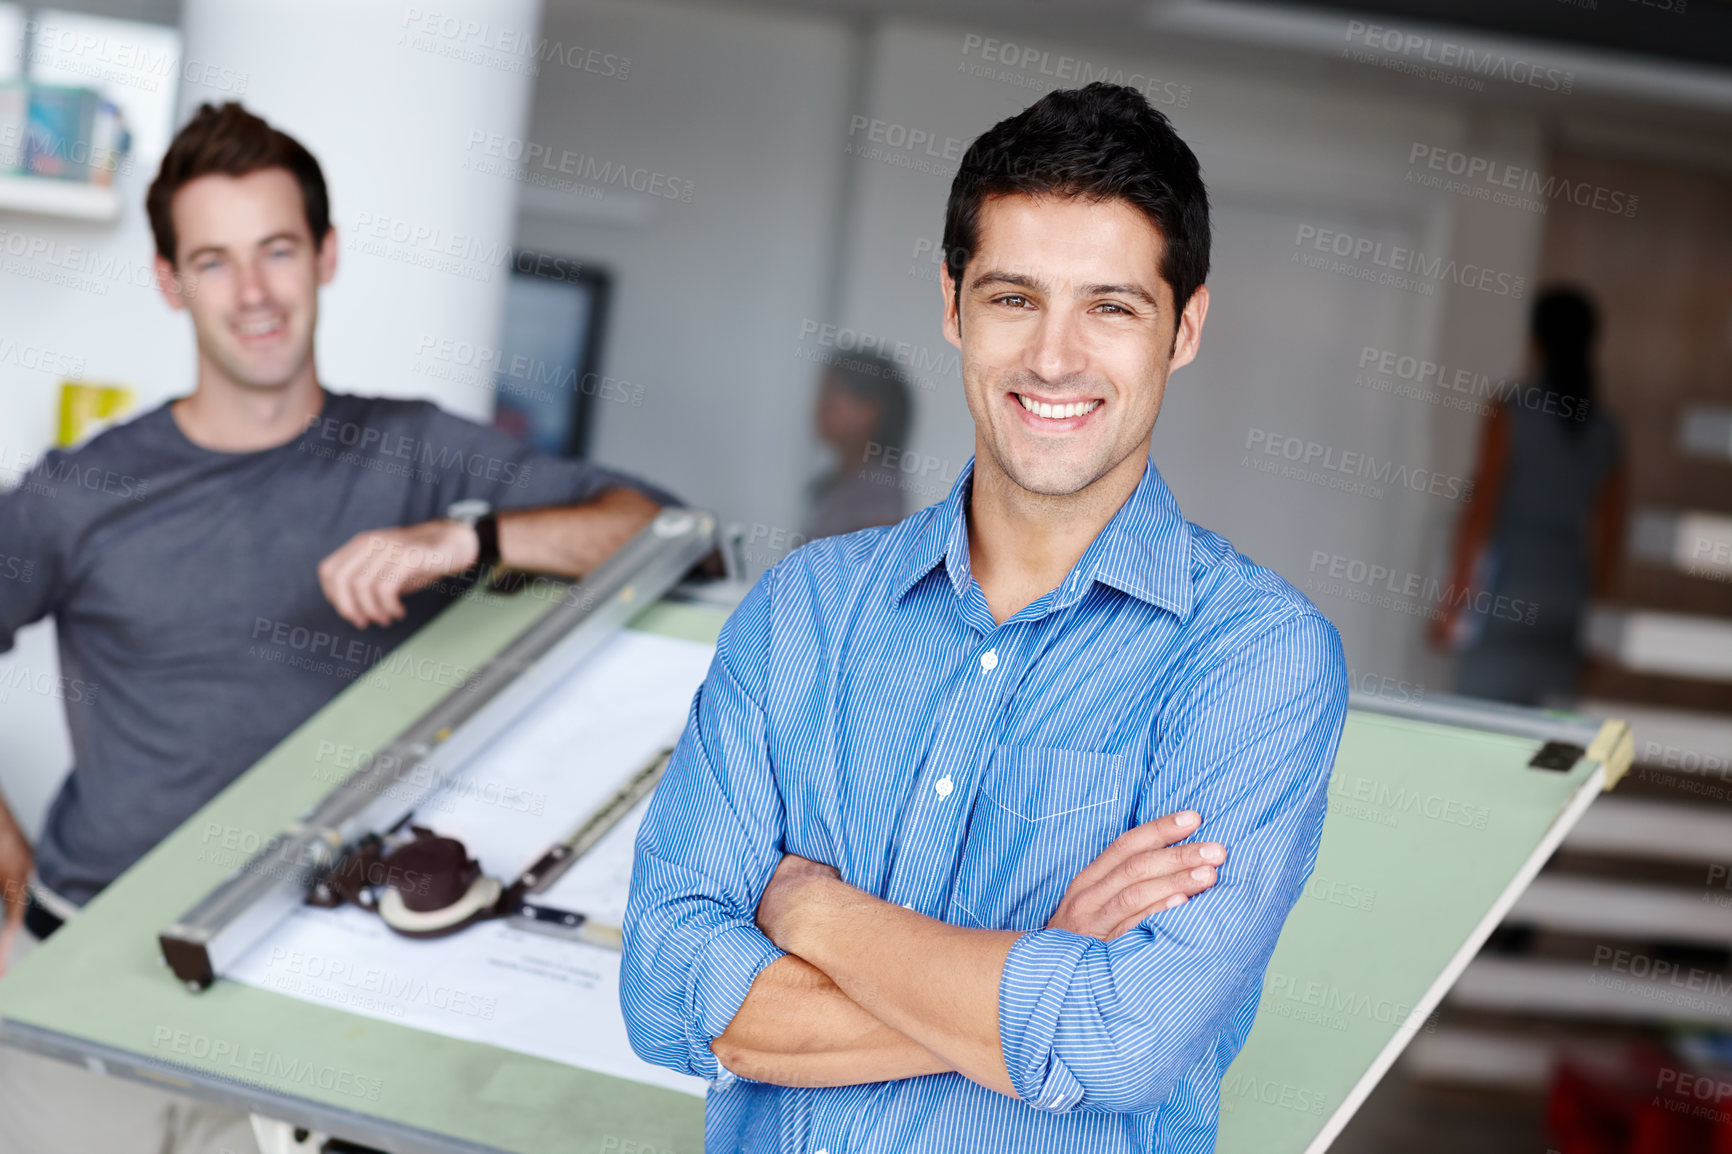 Buy stock photo A handsome young architect standing next to his blueprints with a colleague